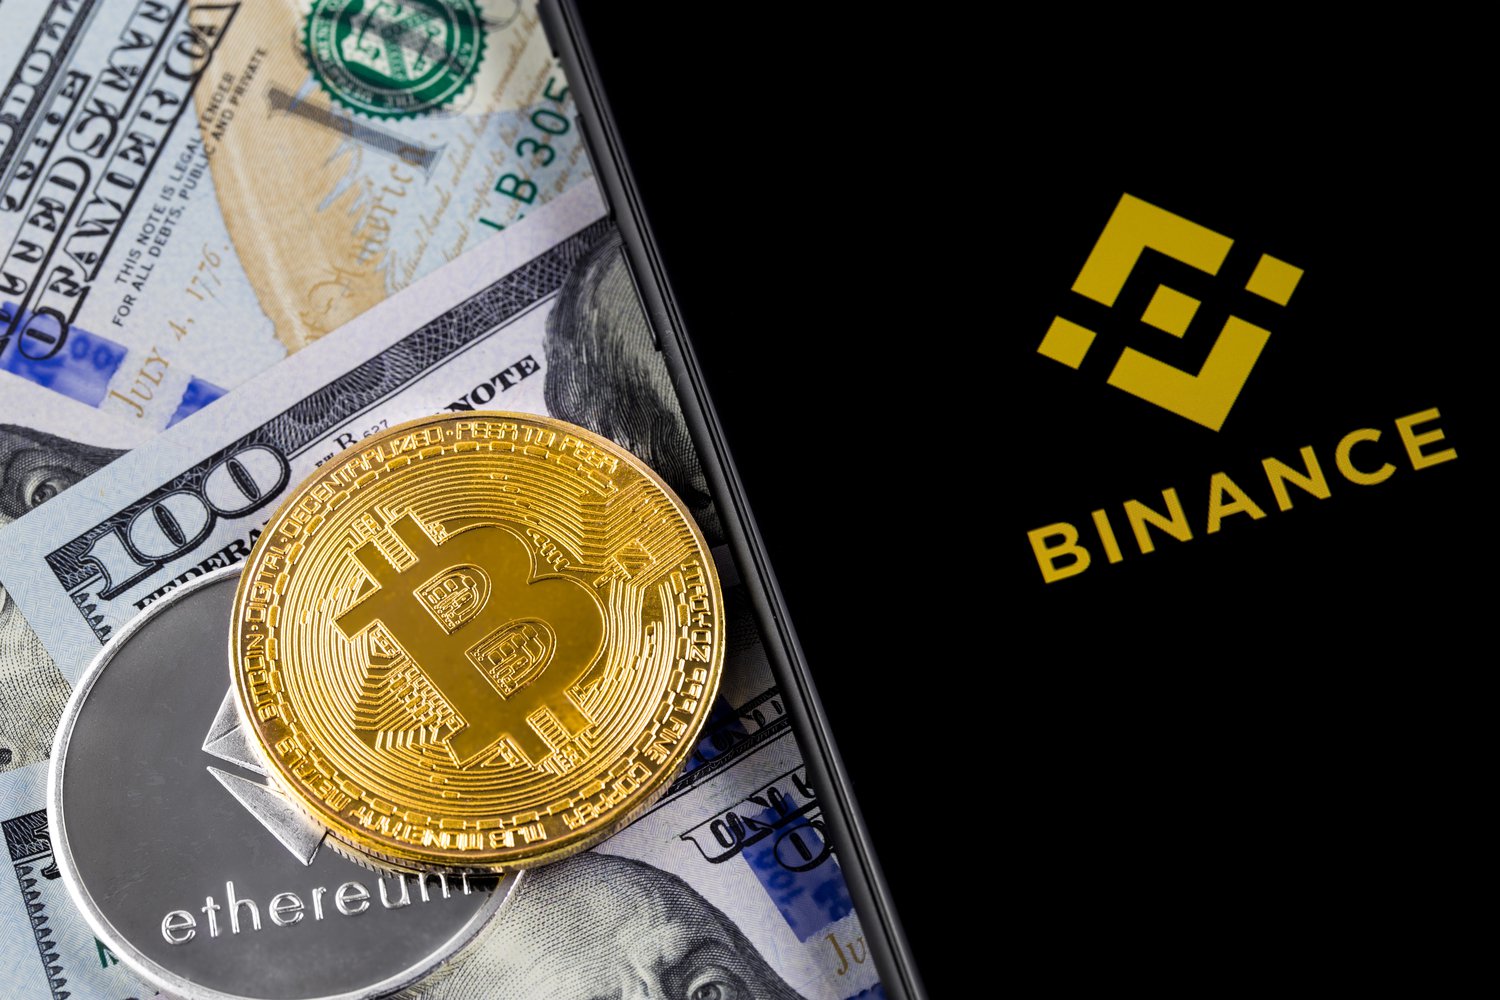 Binance Scores Funding From Venture Arm Of Singapore’s Sovereign Fund